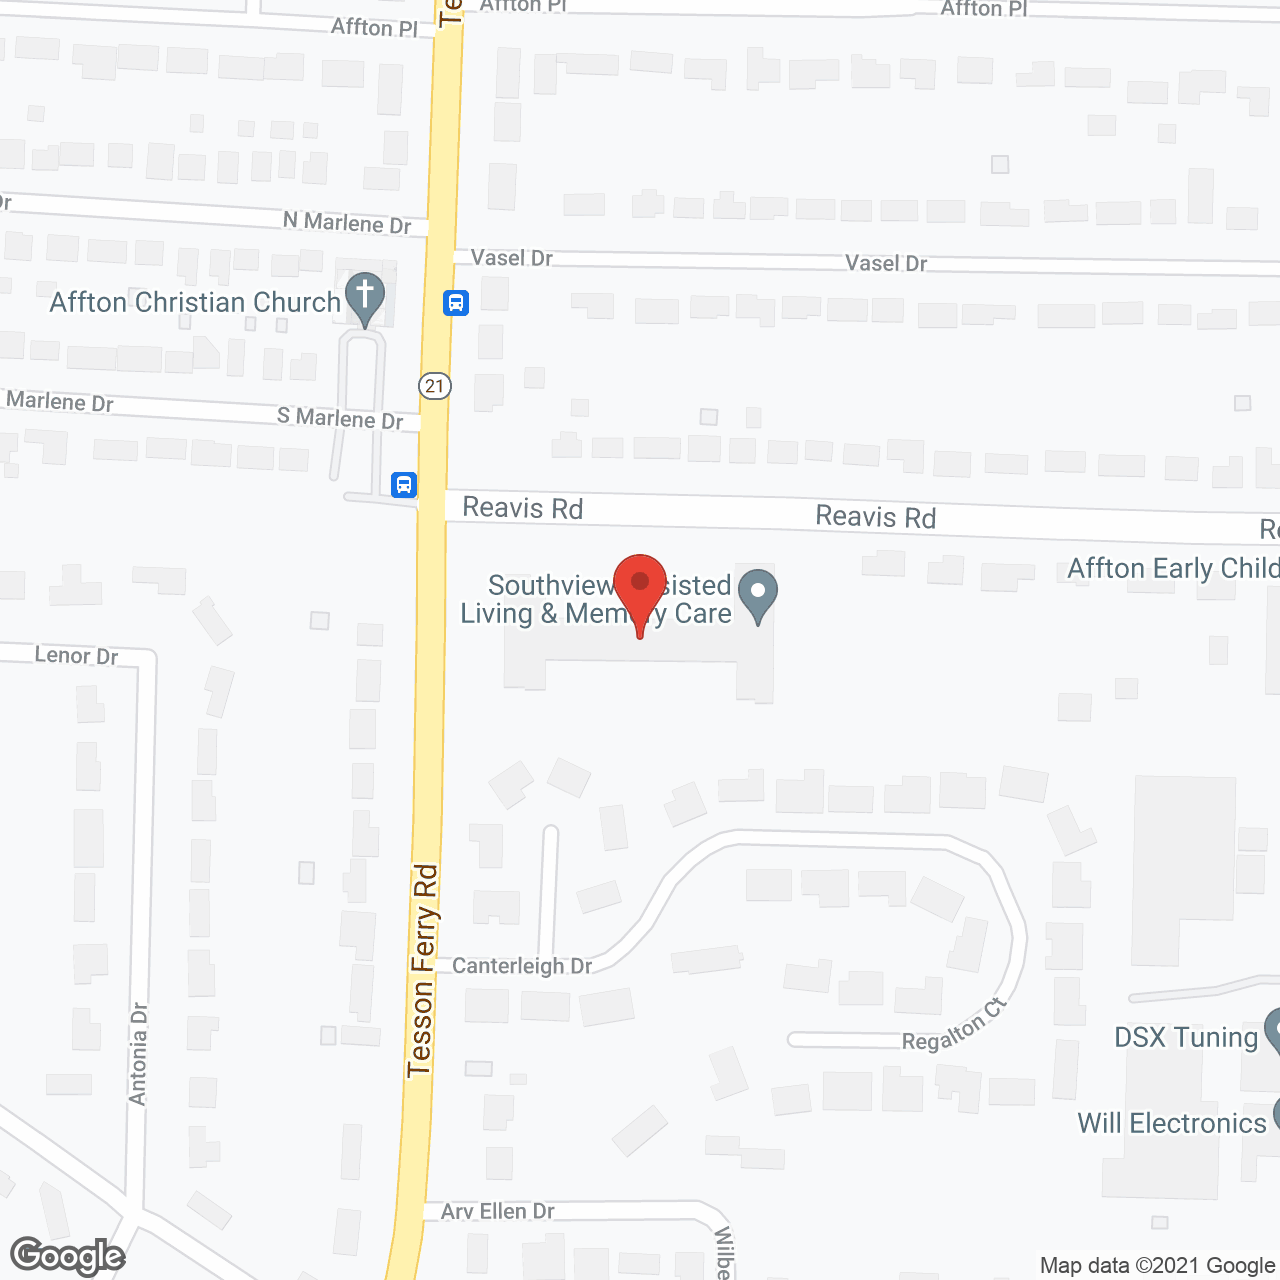 Southview Assisted Living & Memory Care in google map